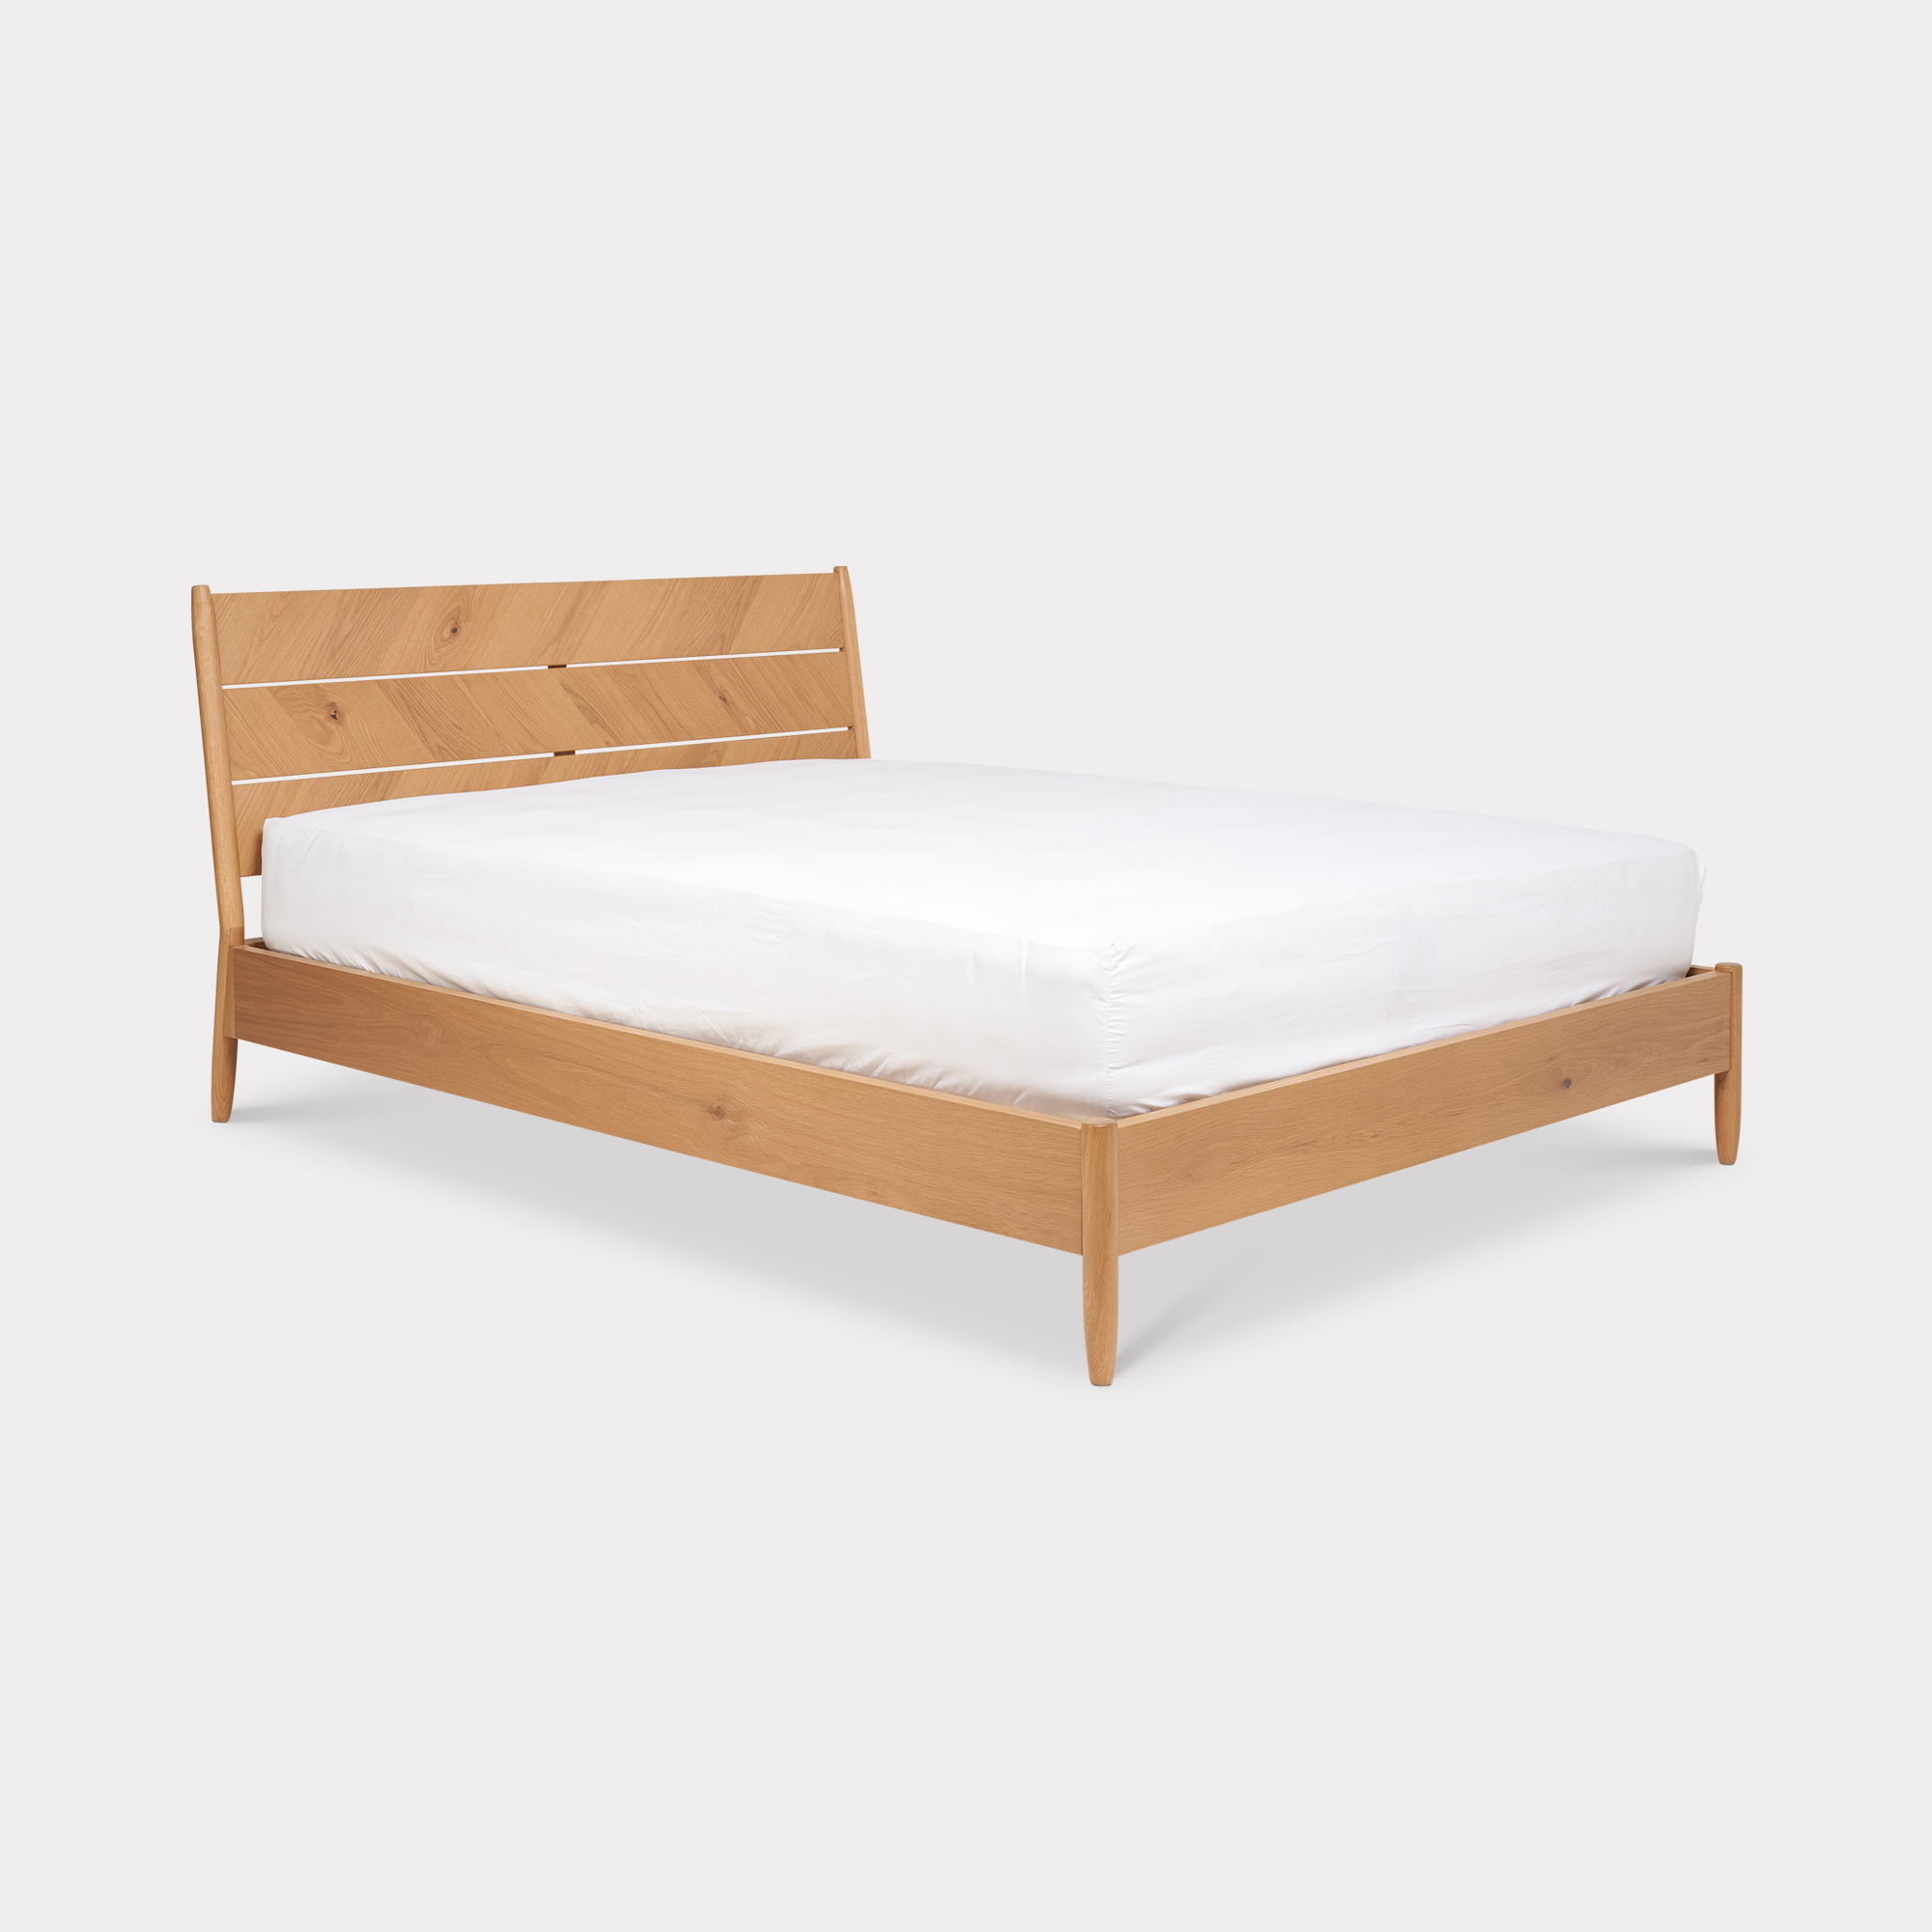 Ercol Monza Double Bed, Brown | Barker & Stonehouse